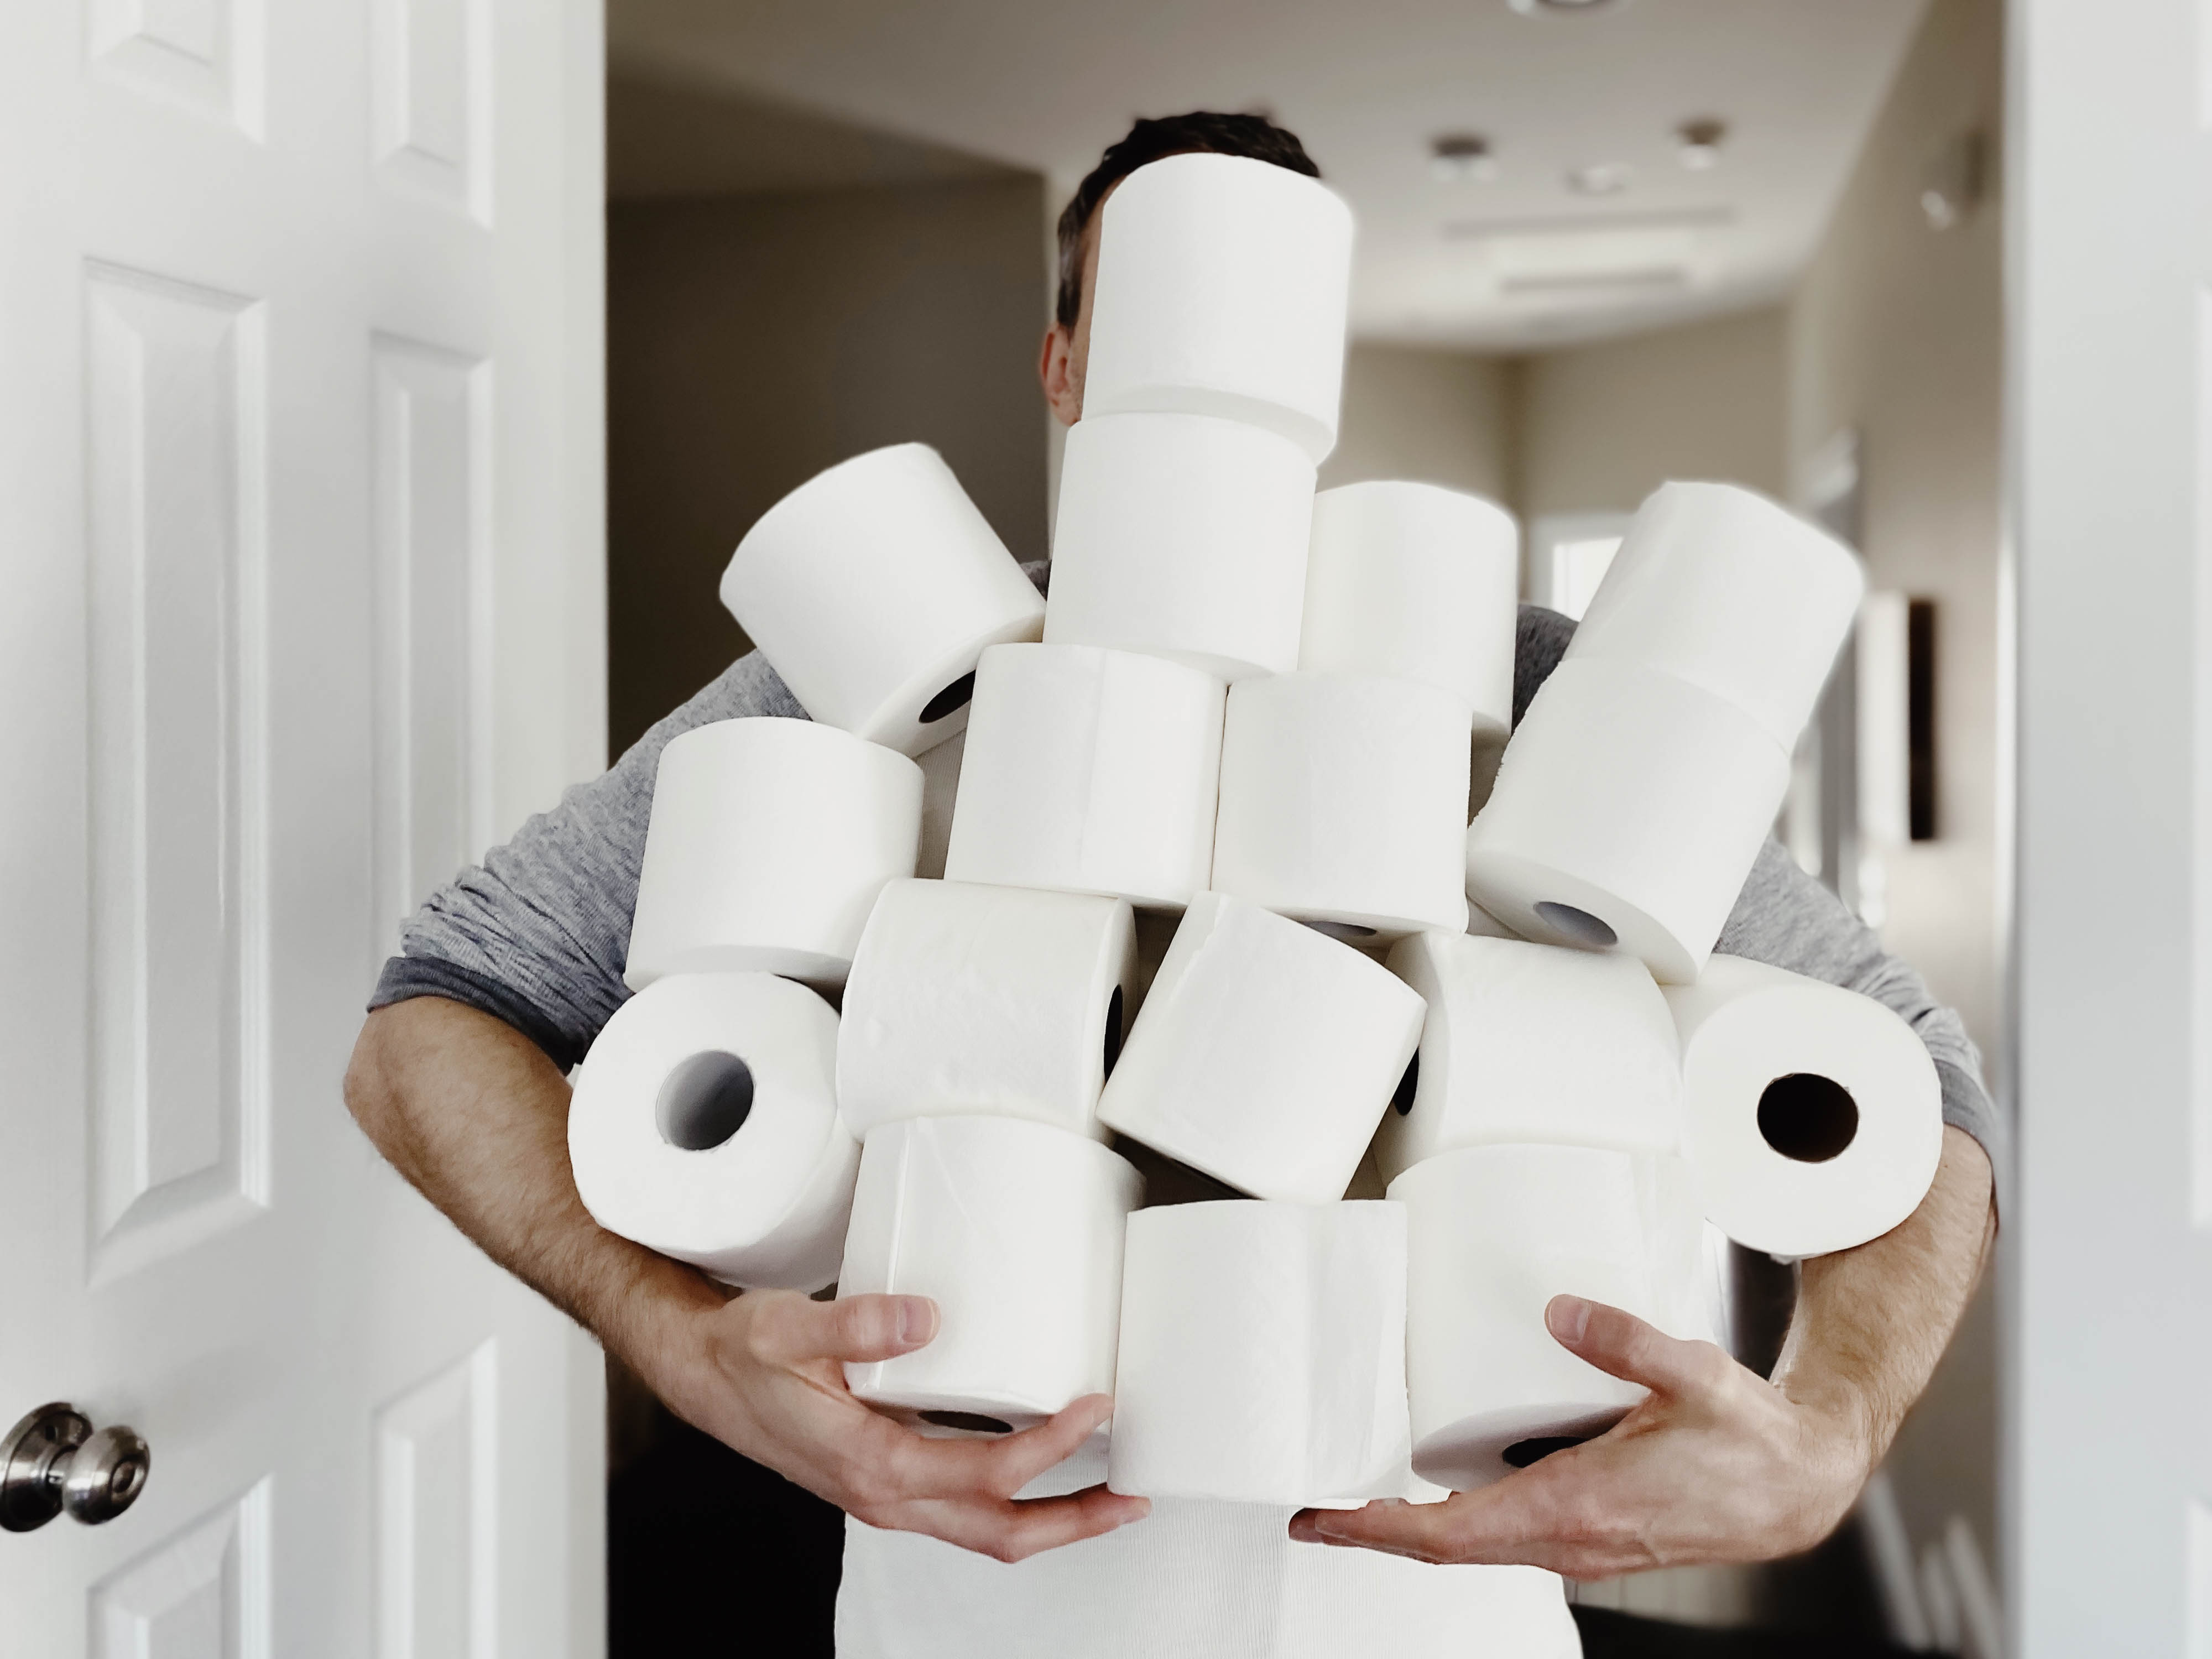 Person carrying an armload of toilet paper